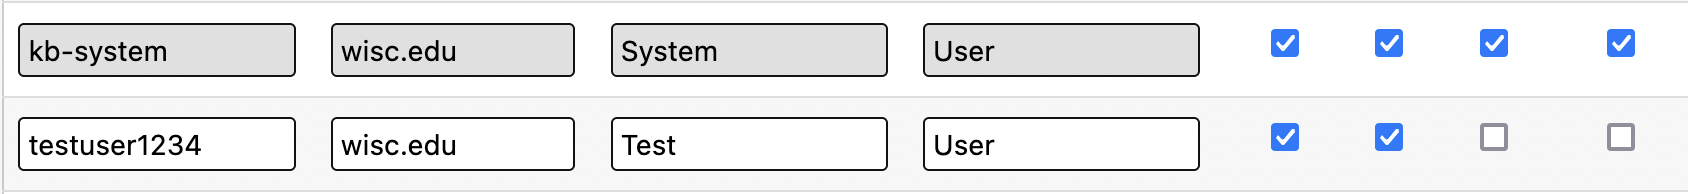 Image showing two users, one whose user information is editable and the other whose information is read-only. In both instances, the permissions checkboxes can be modified.